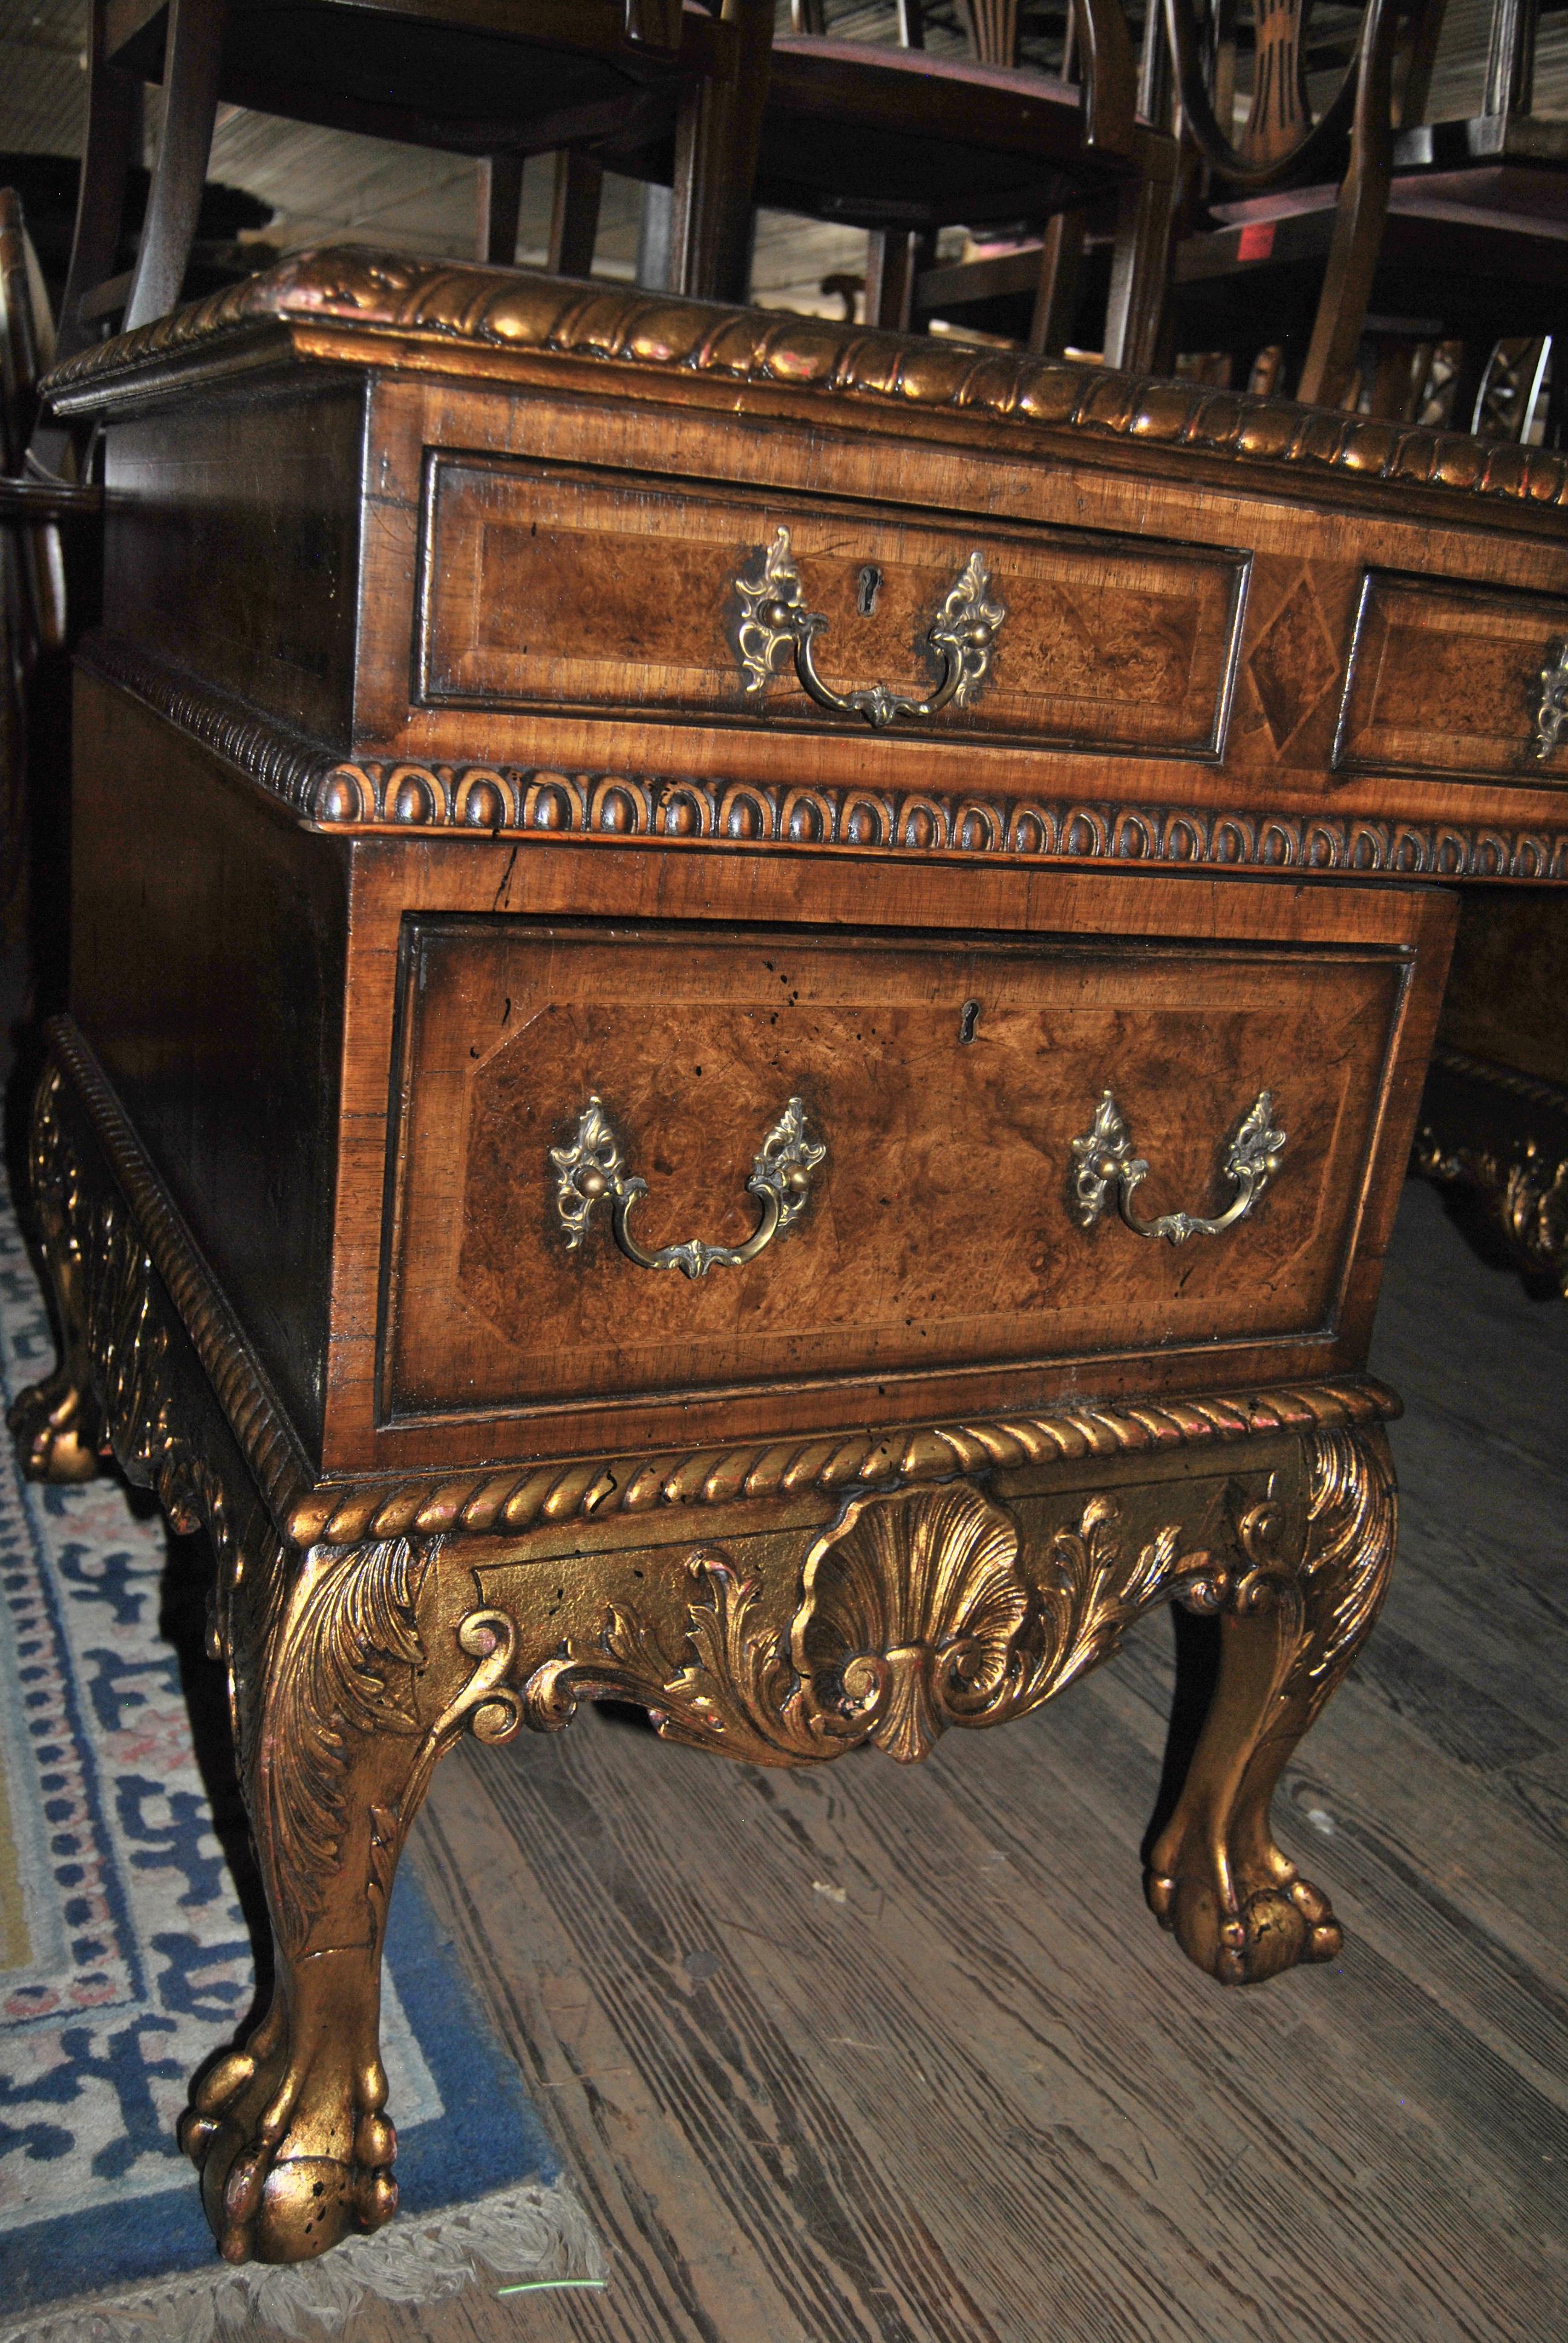 This is a walnut desk made in England, circa 1840. The top has a nicely shaped green leather writing surface with gold tooling. There is a hand carved gadrooned edge around the entire top that is done in a gold gilt. There are 4 drawers across the